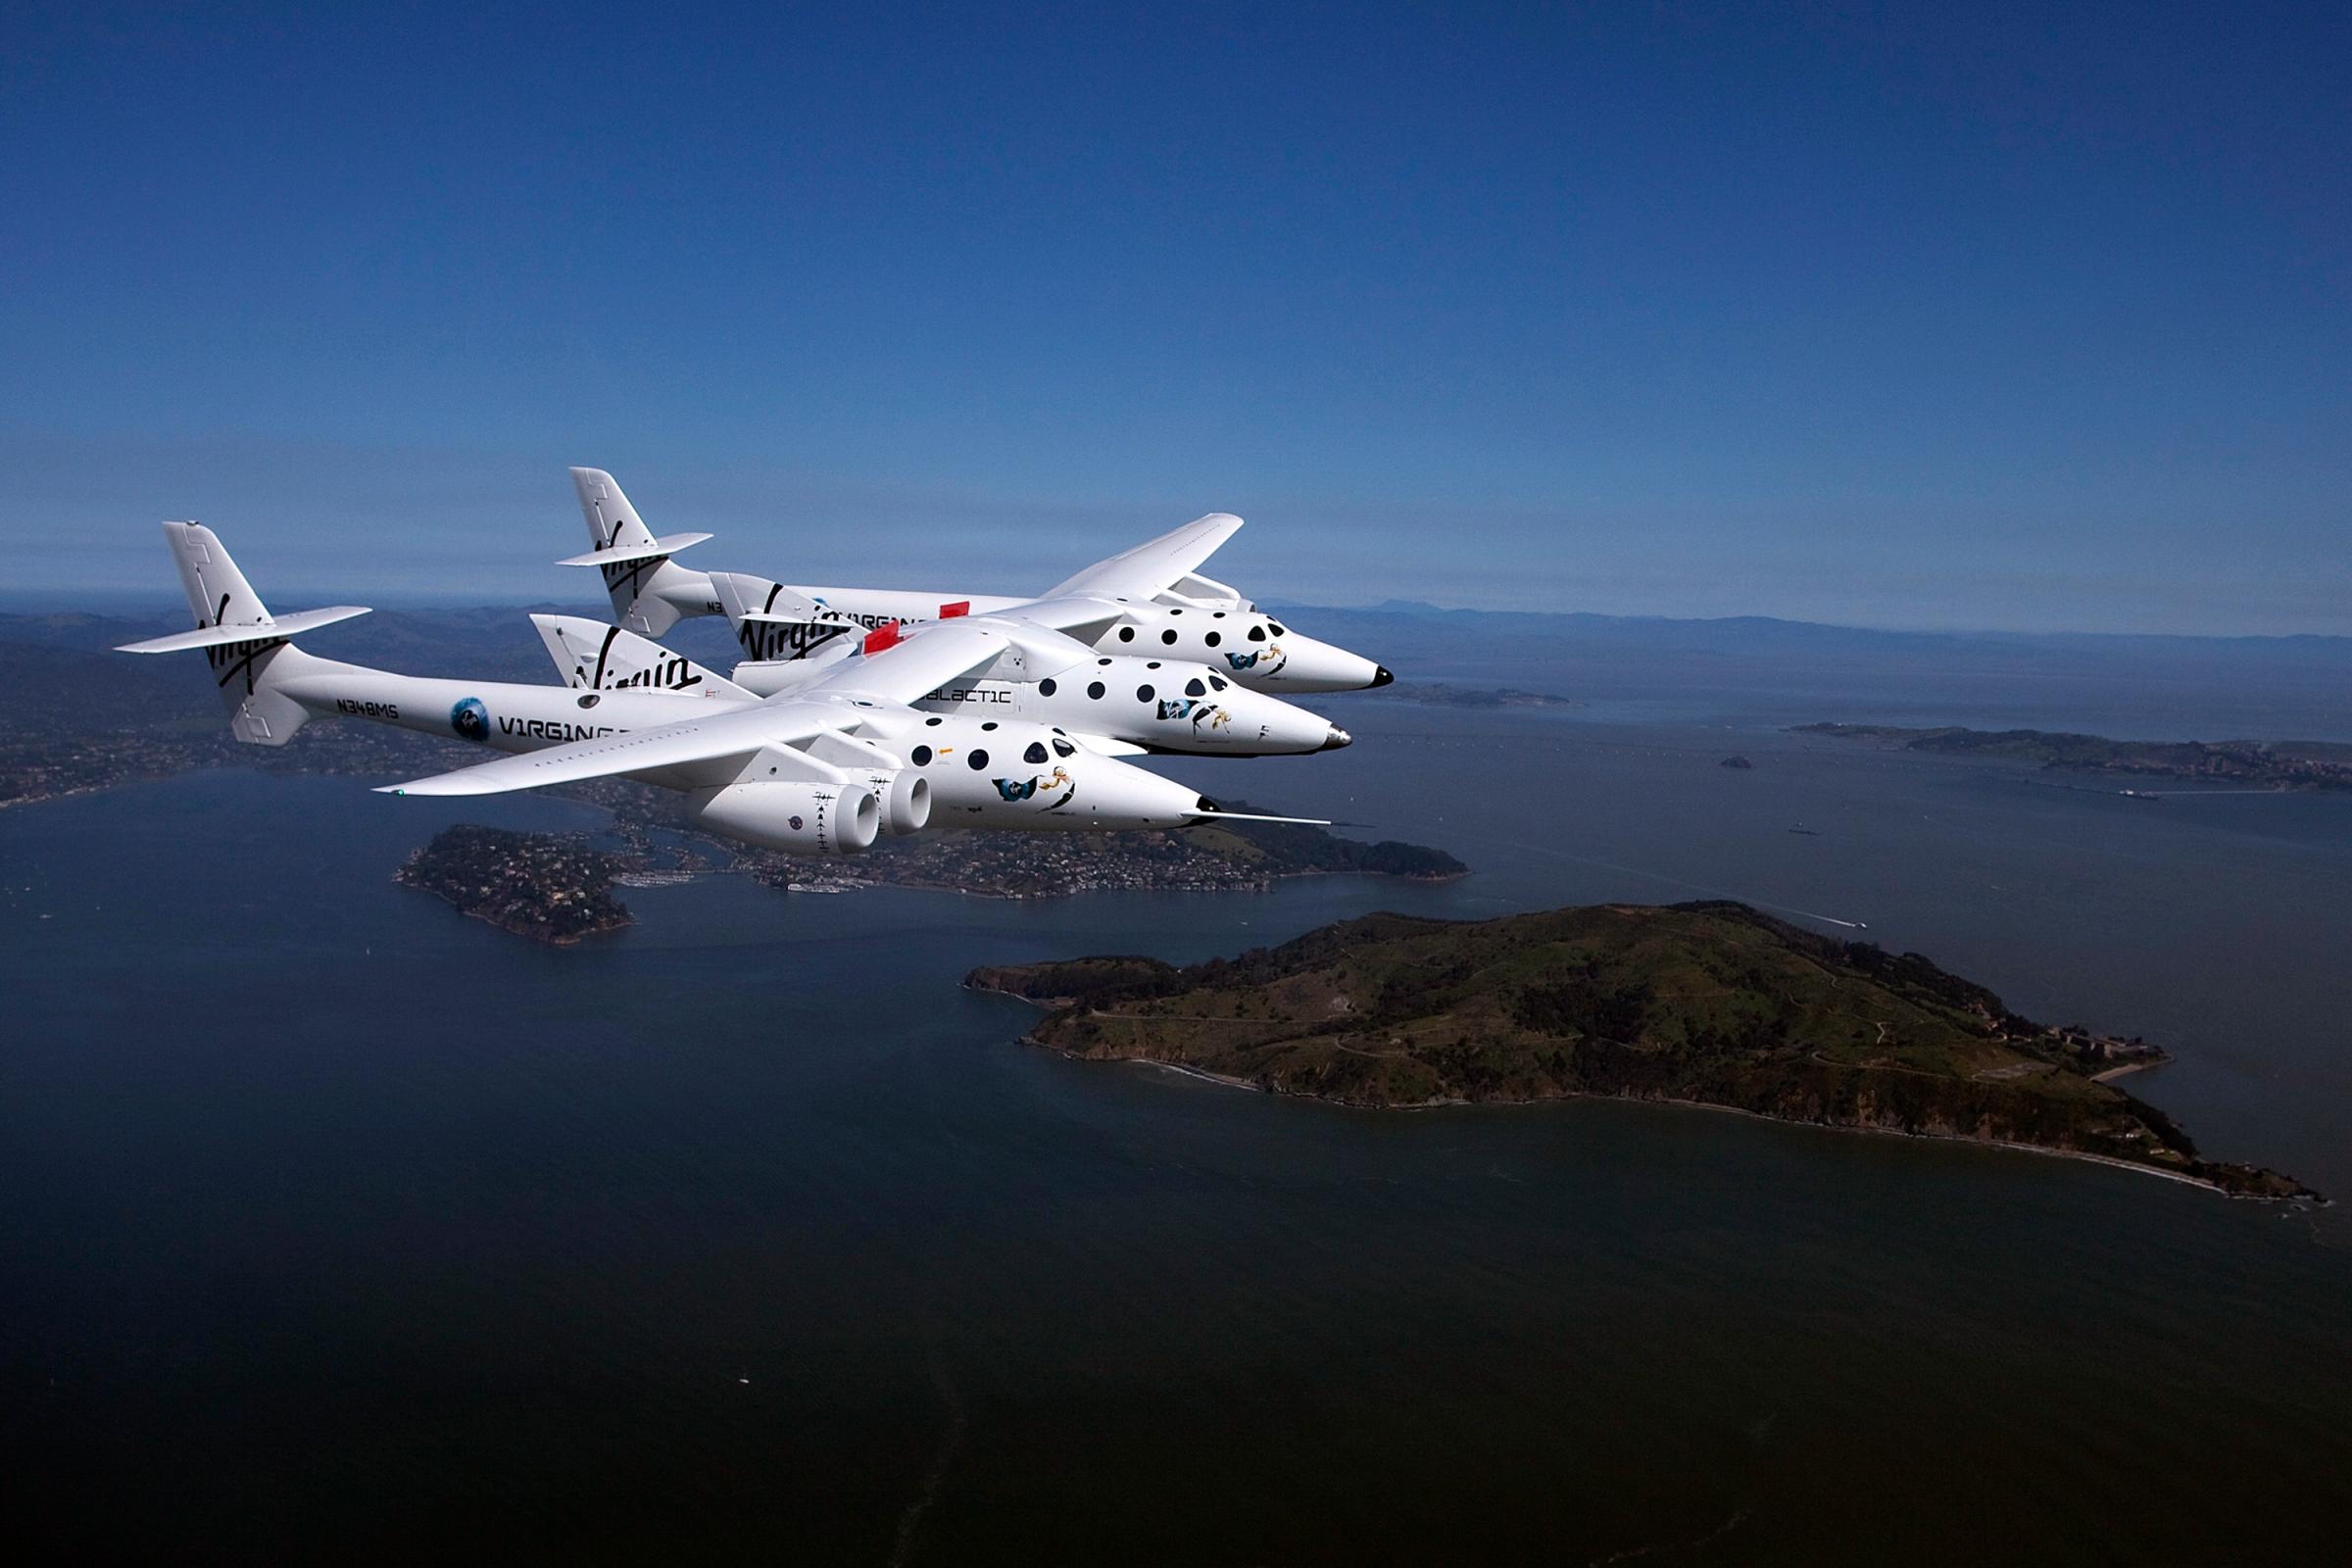 Virgin Galactic's private SpaceShipTwo spacecraft flies over the San Francisco Bay in San Francisco on April 6, 2011.